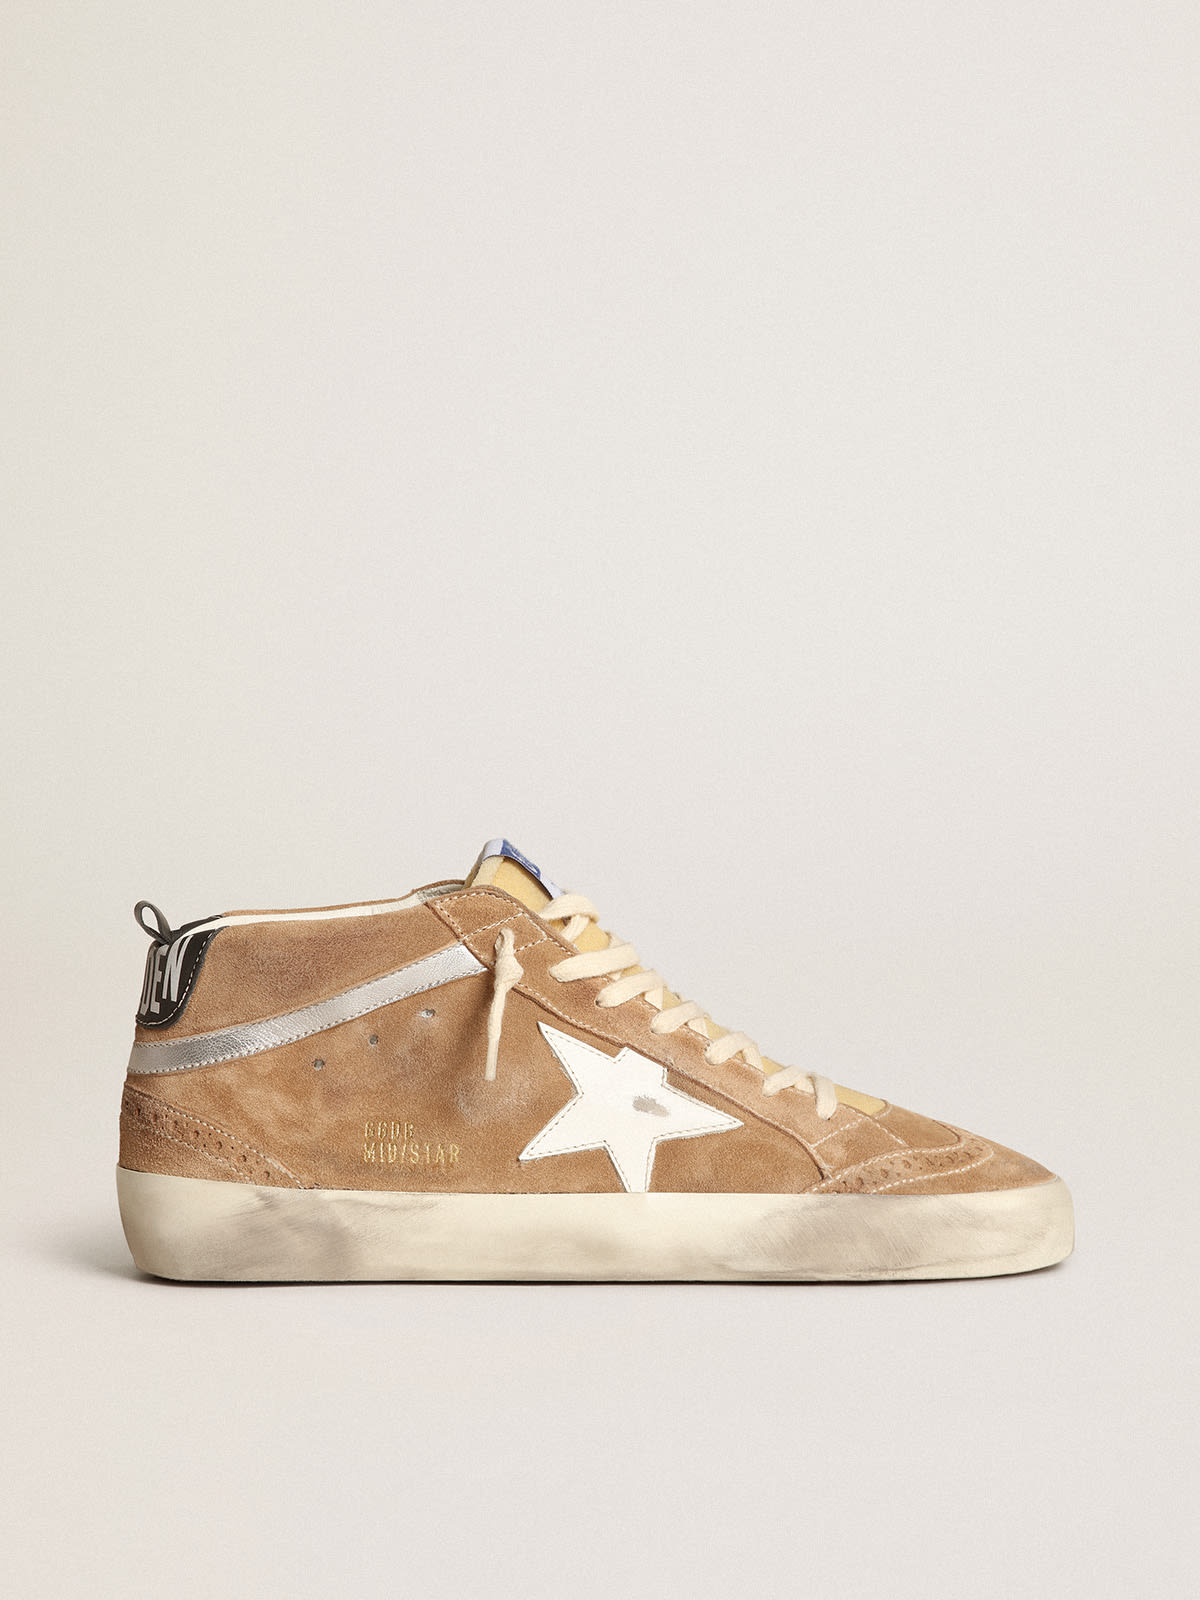 Golden Goose - Men's Mid Star in tobacco-colored suede with white leather star in 